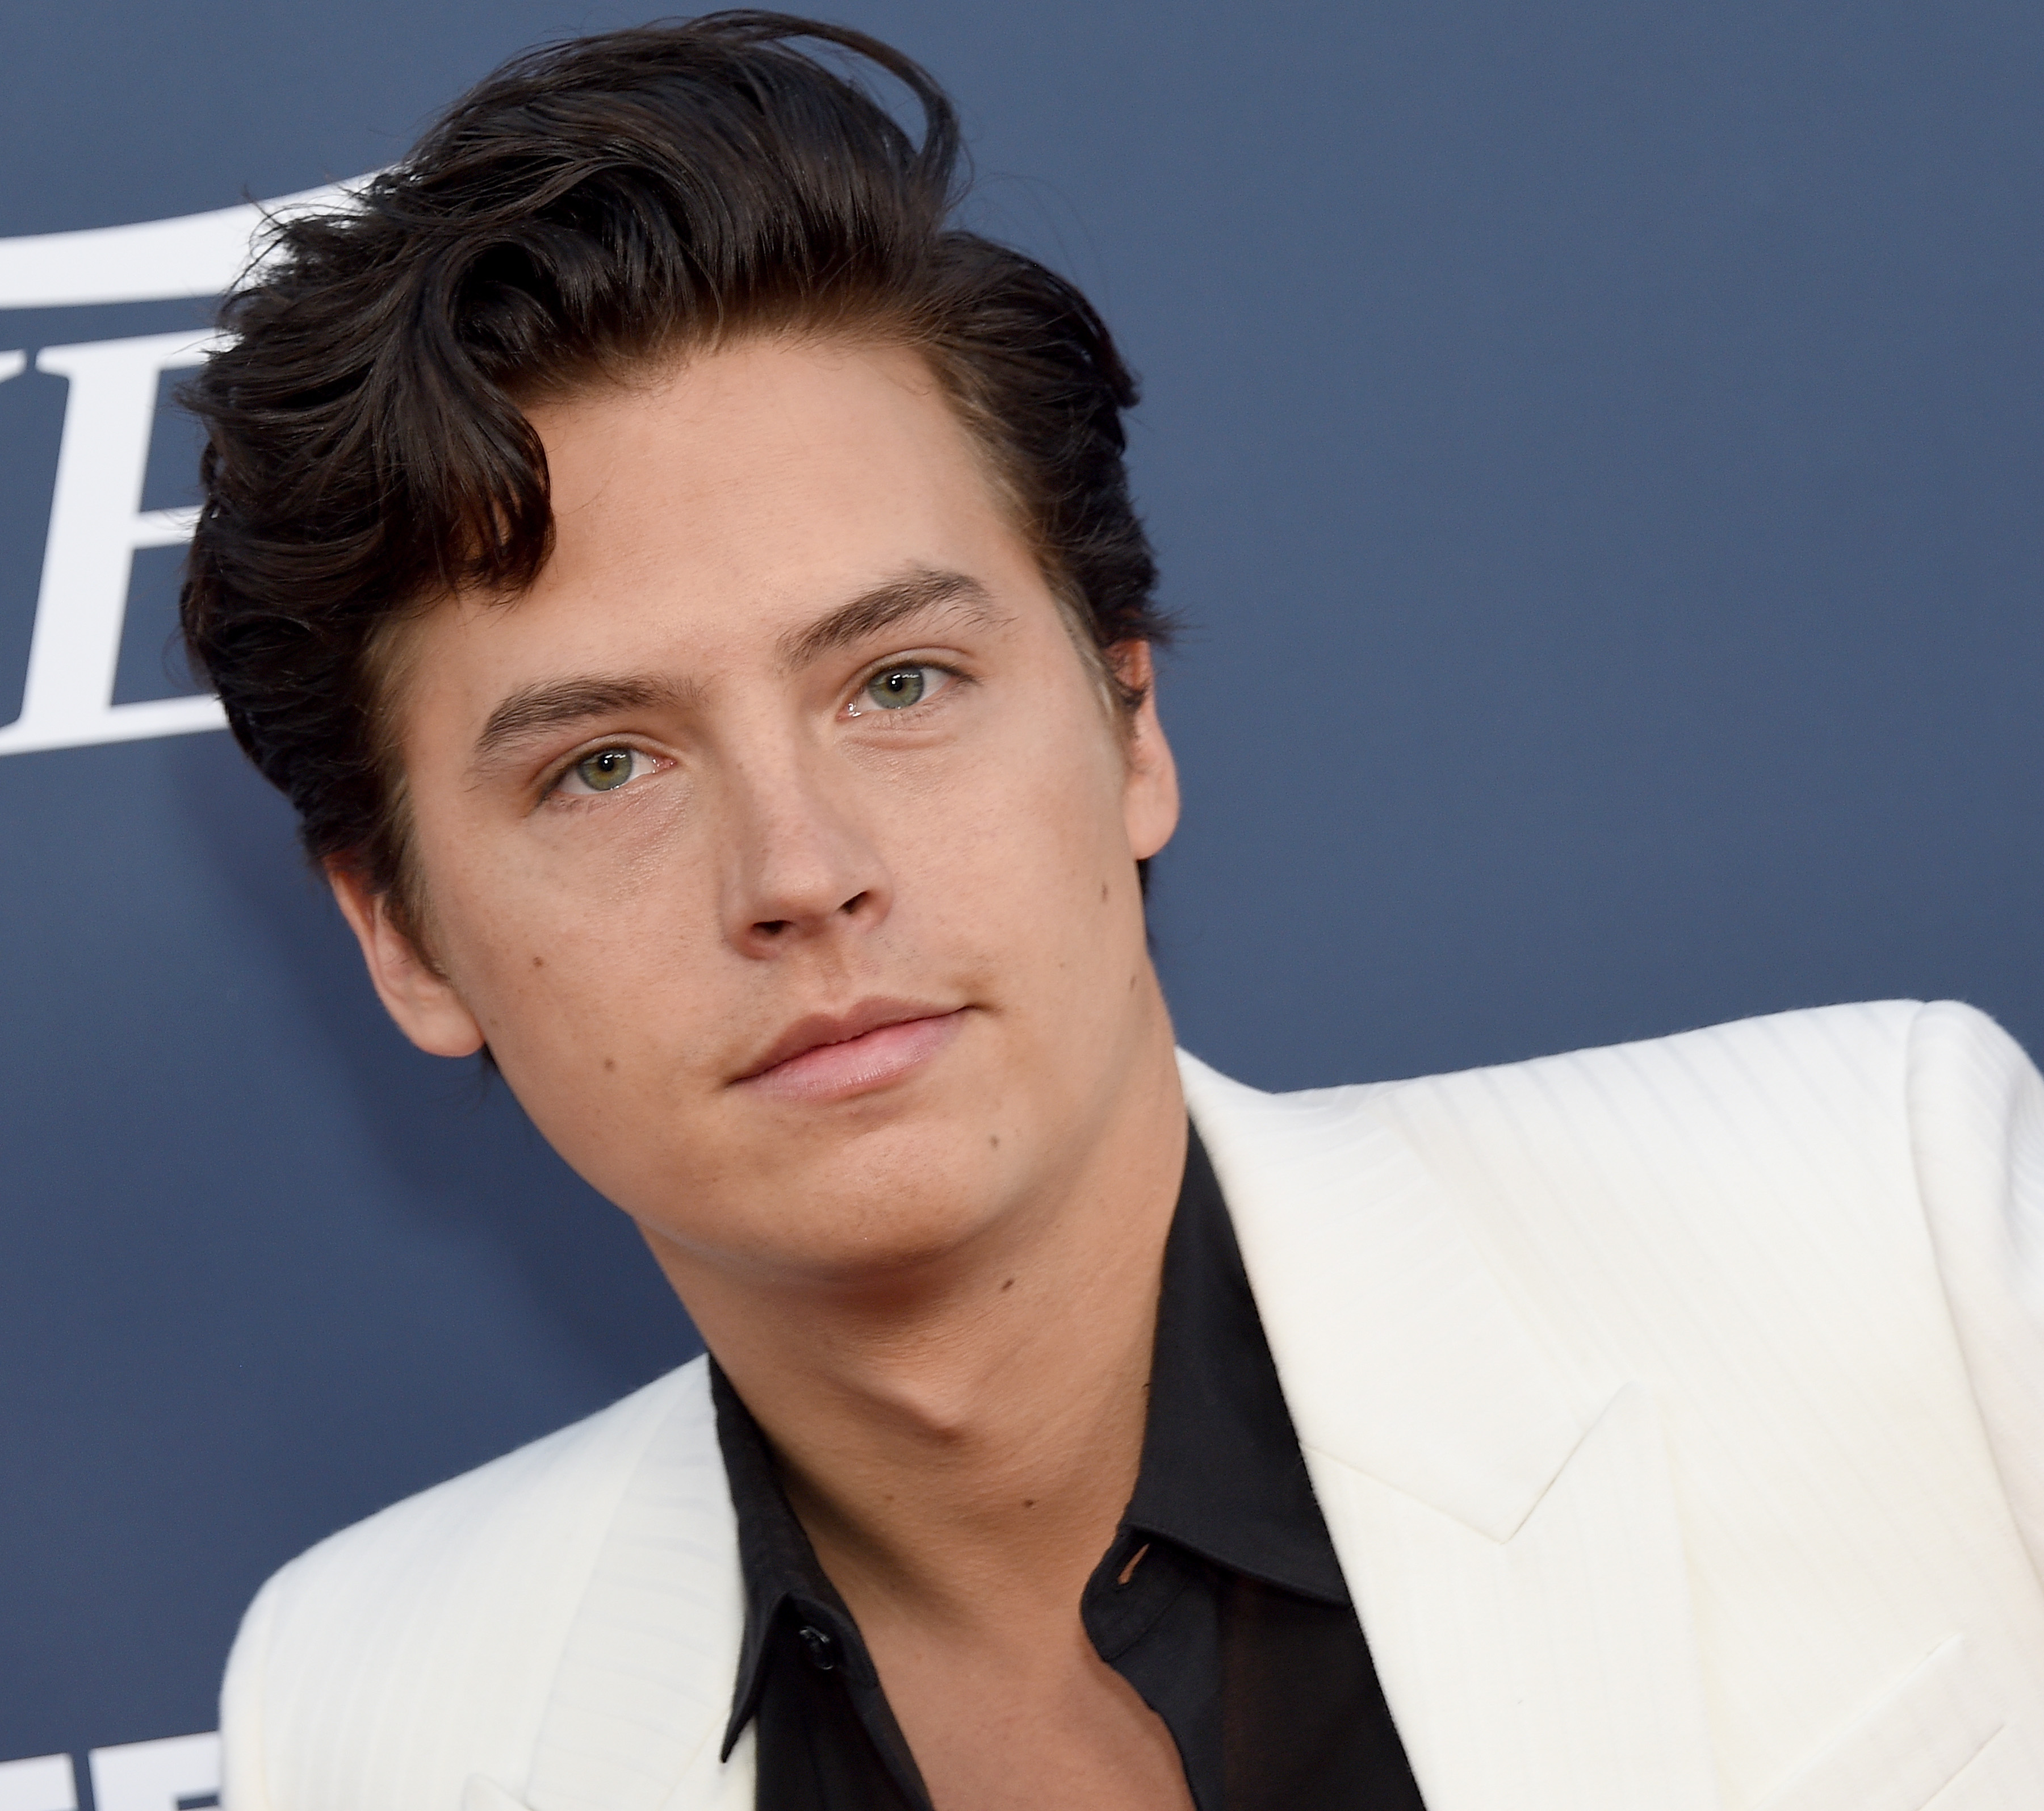 Cole Sprouse at Variety's Power Of Young Hollywood event hosted at The H Club in Los Angeles, California, Los Angeles on August 6, 2019. | Source: Getty Images